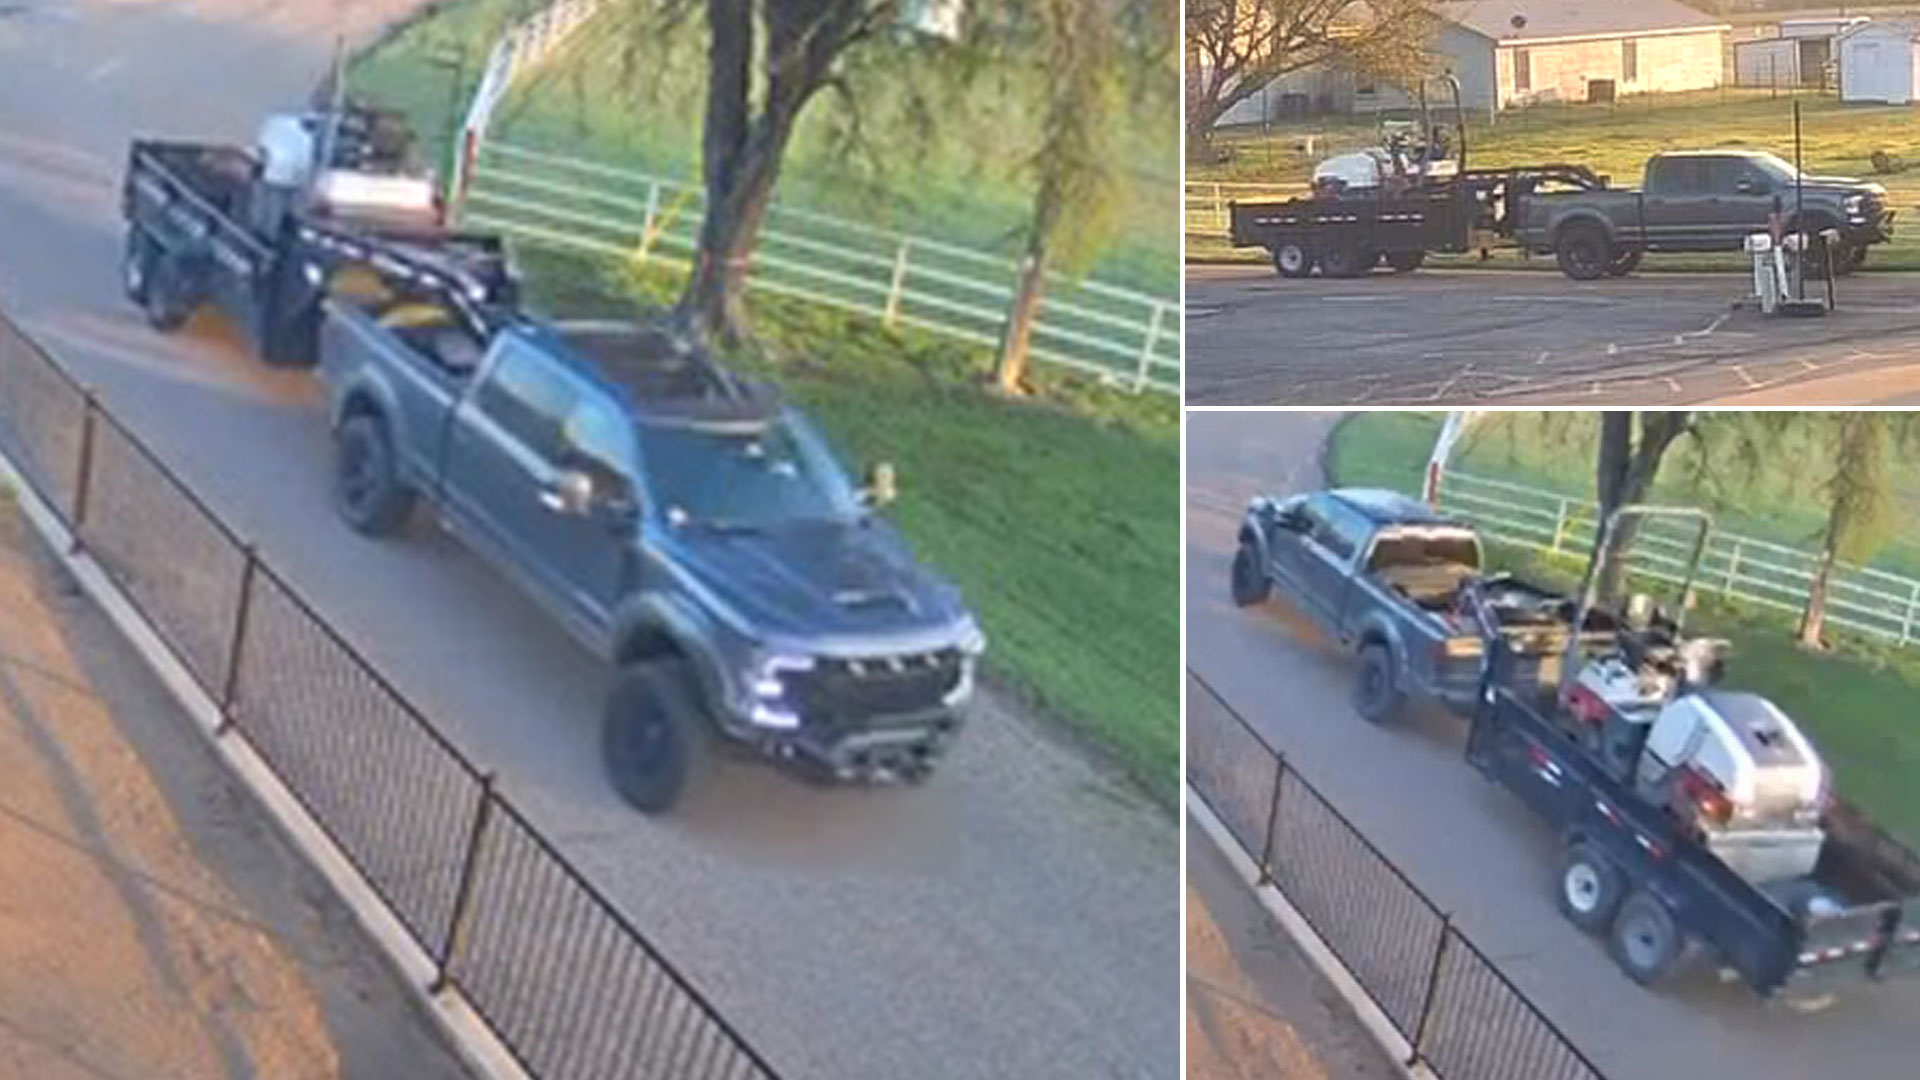 Rhome Police are looking for the driver of the pickup truck in connection with a fatal hit-and-run crash on Friday, March 10, 2023.